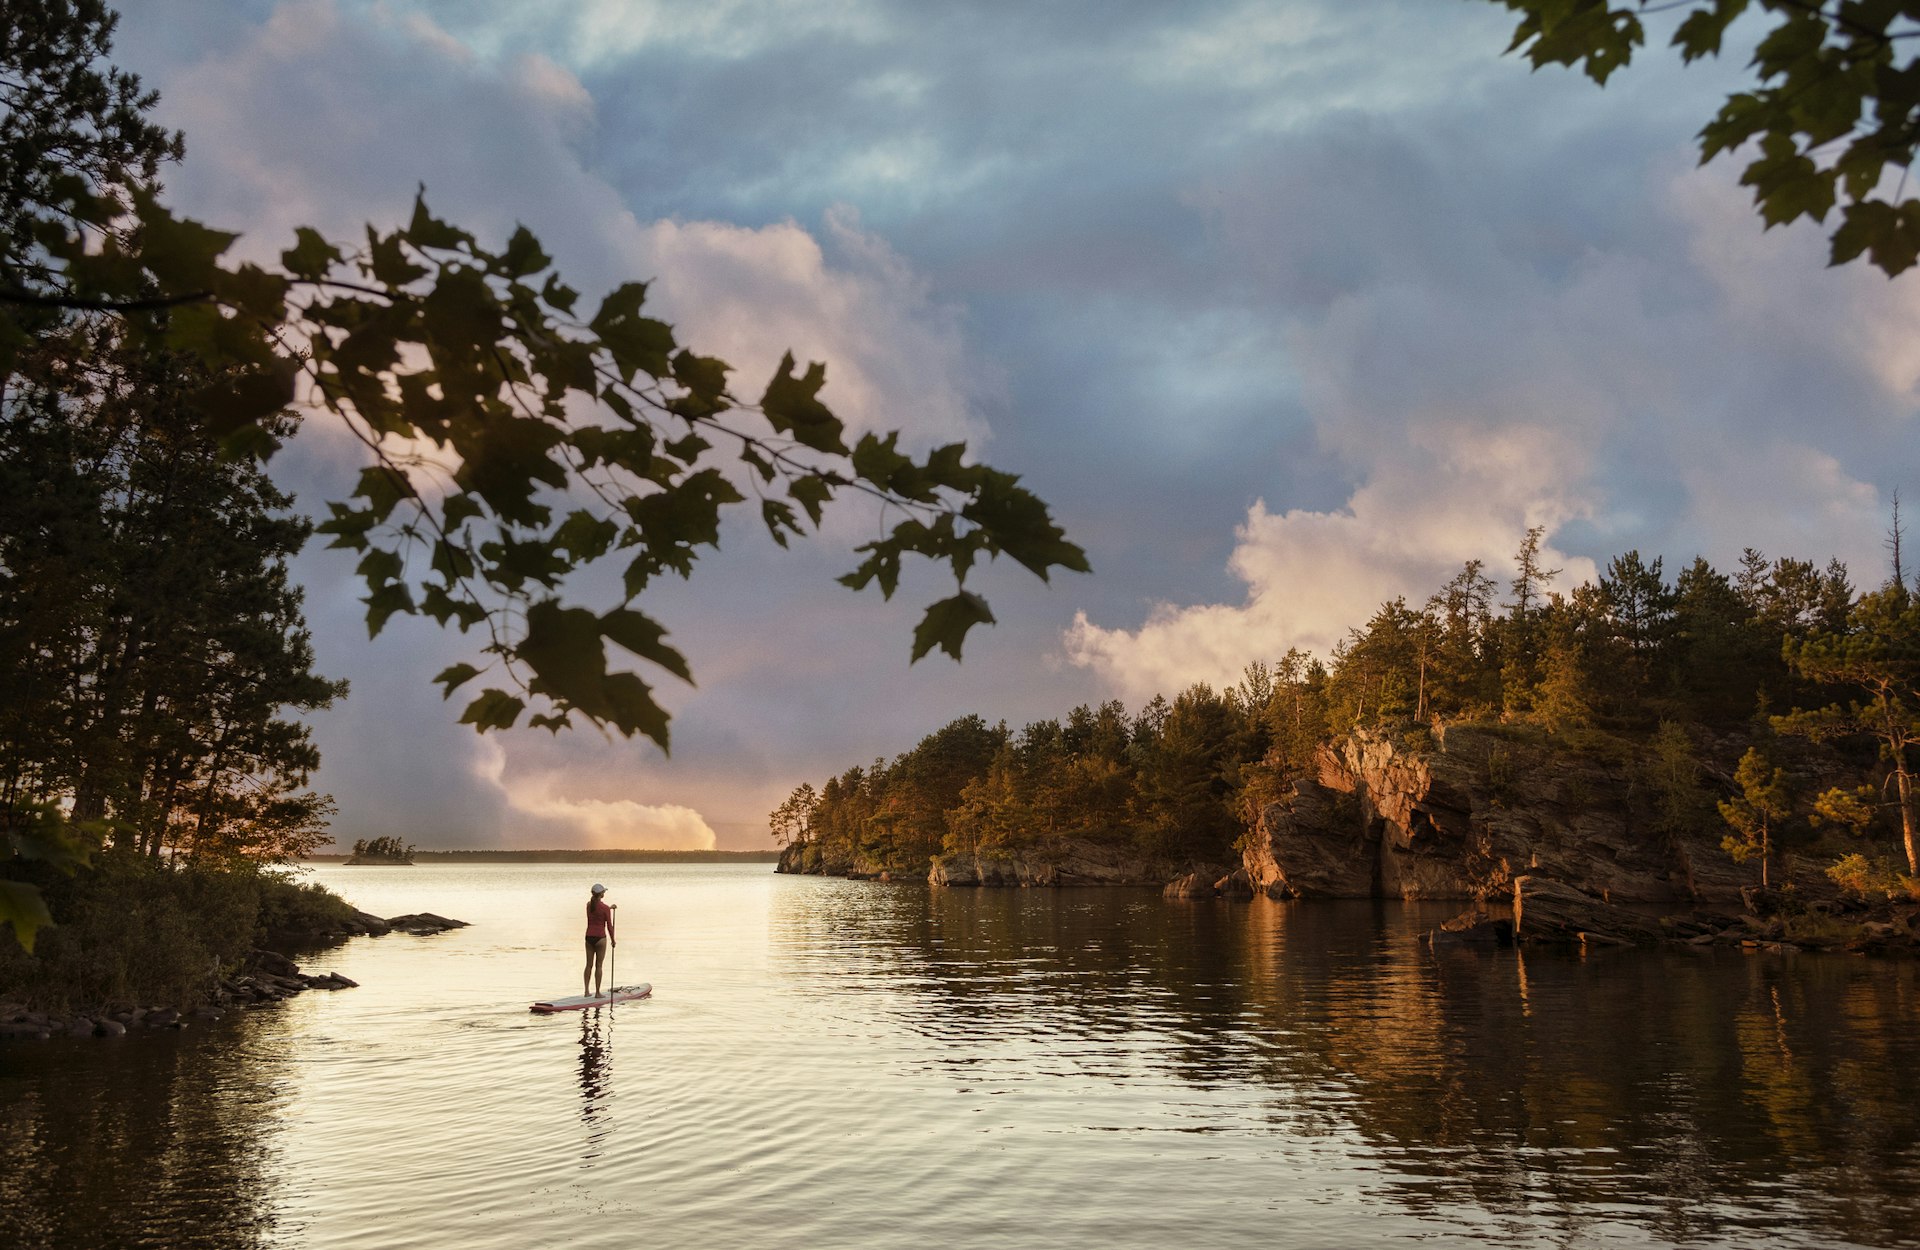 A woman stands on a paddleboard at sunset at Voyageurs National Park, Minnesota